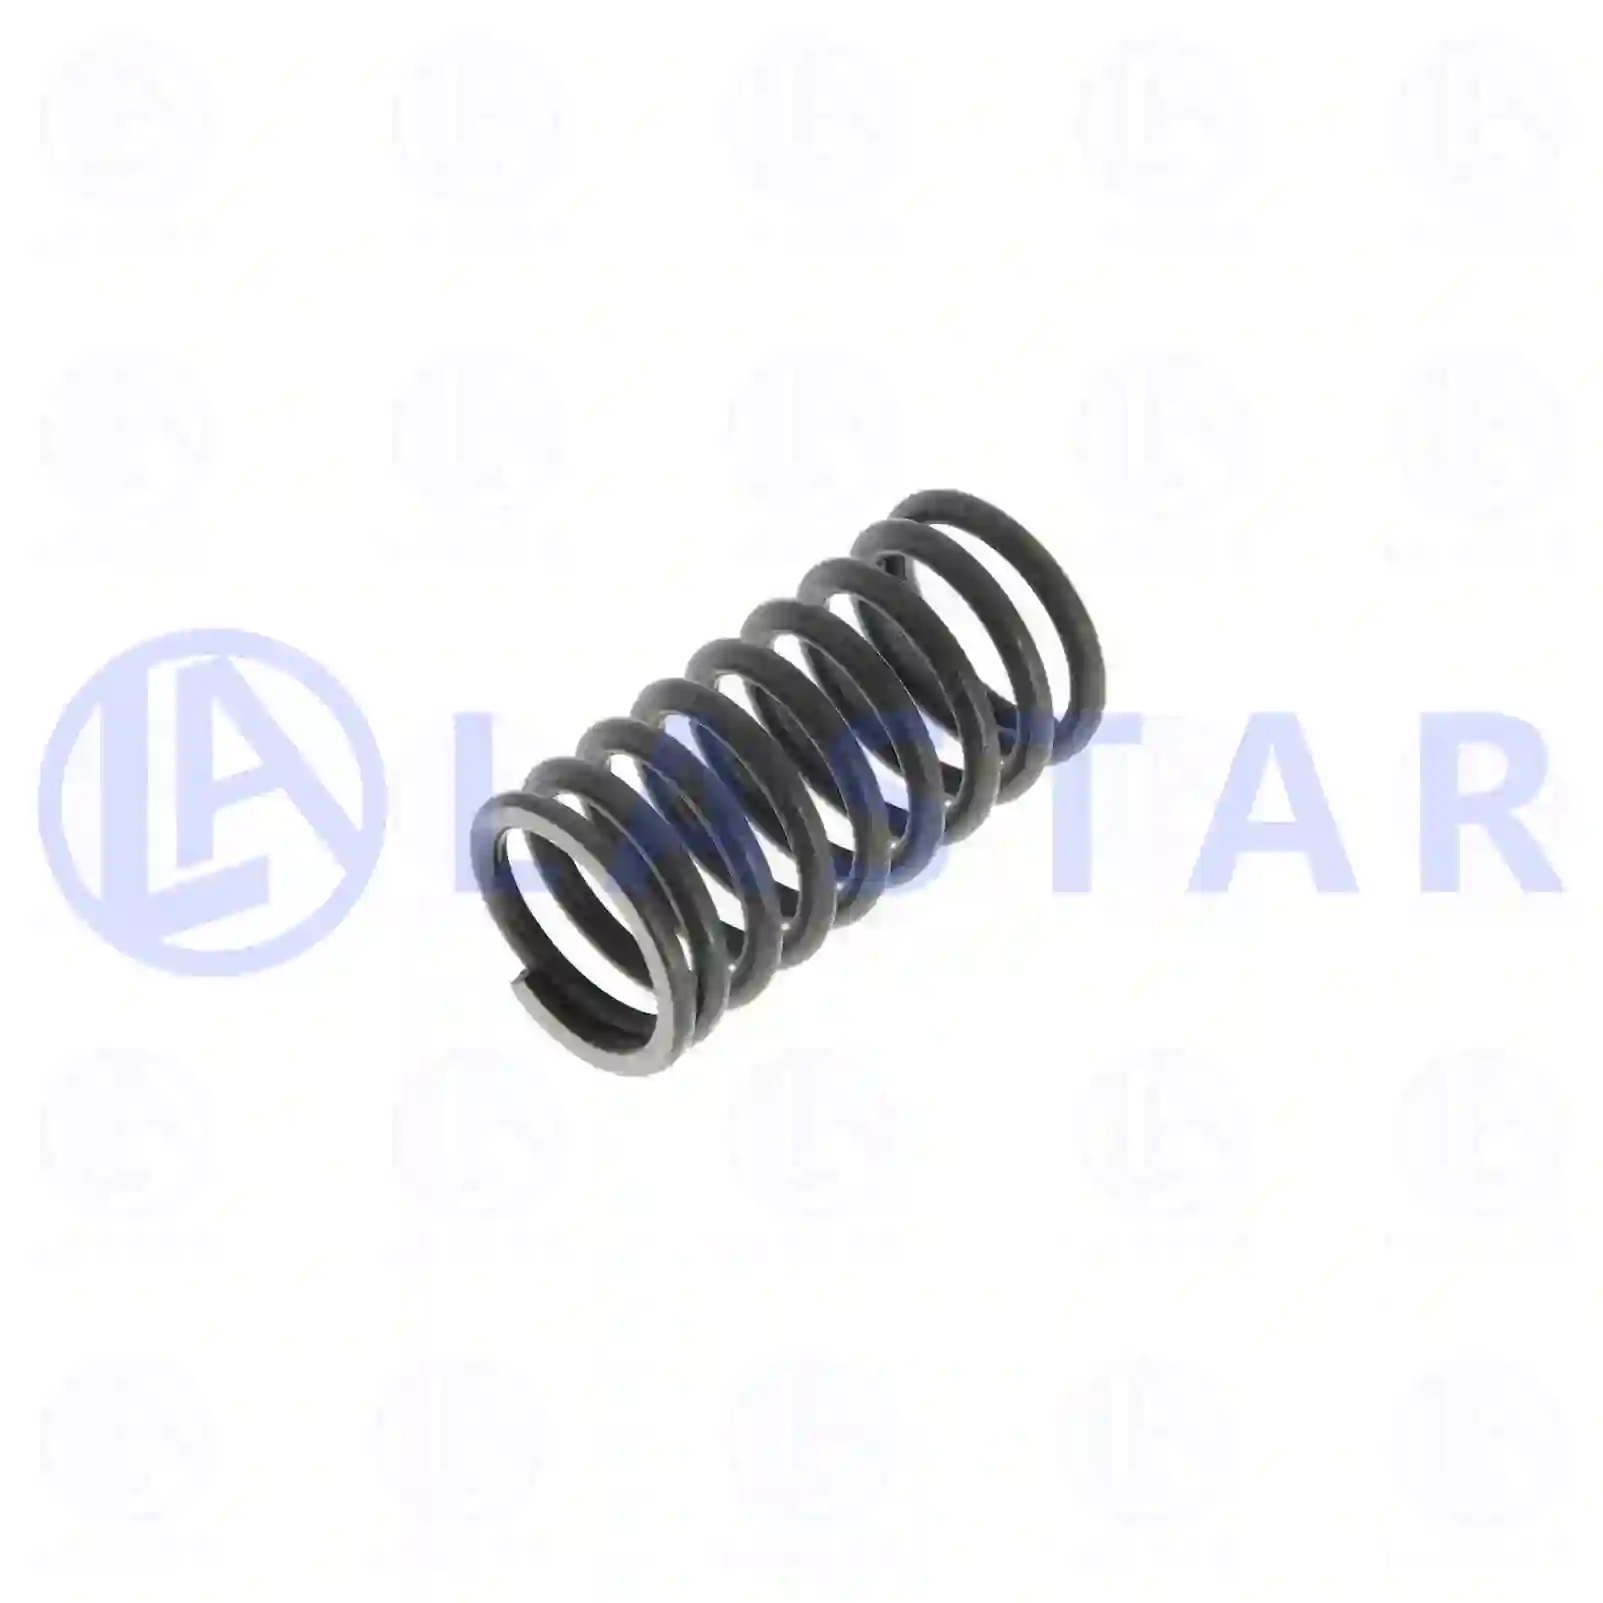  Cylinder Head Valve spring, intake and exhaust, inner, la no: 77704810 ,  oem no:170043, 1728922, ZG40324-0008 Lastar Spare Part | Truck Spare Parts, Auotomotive Spare Parts